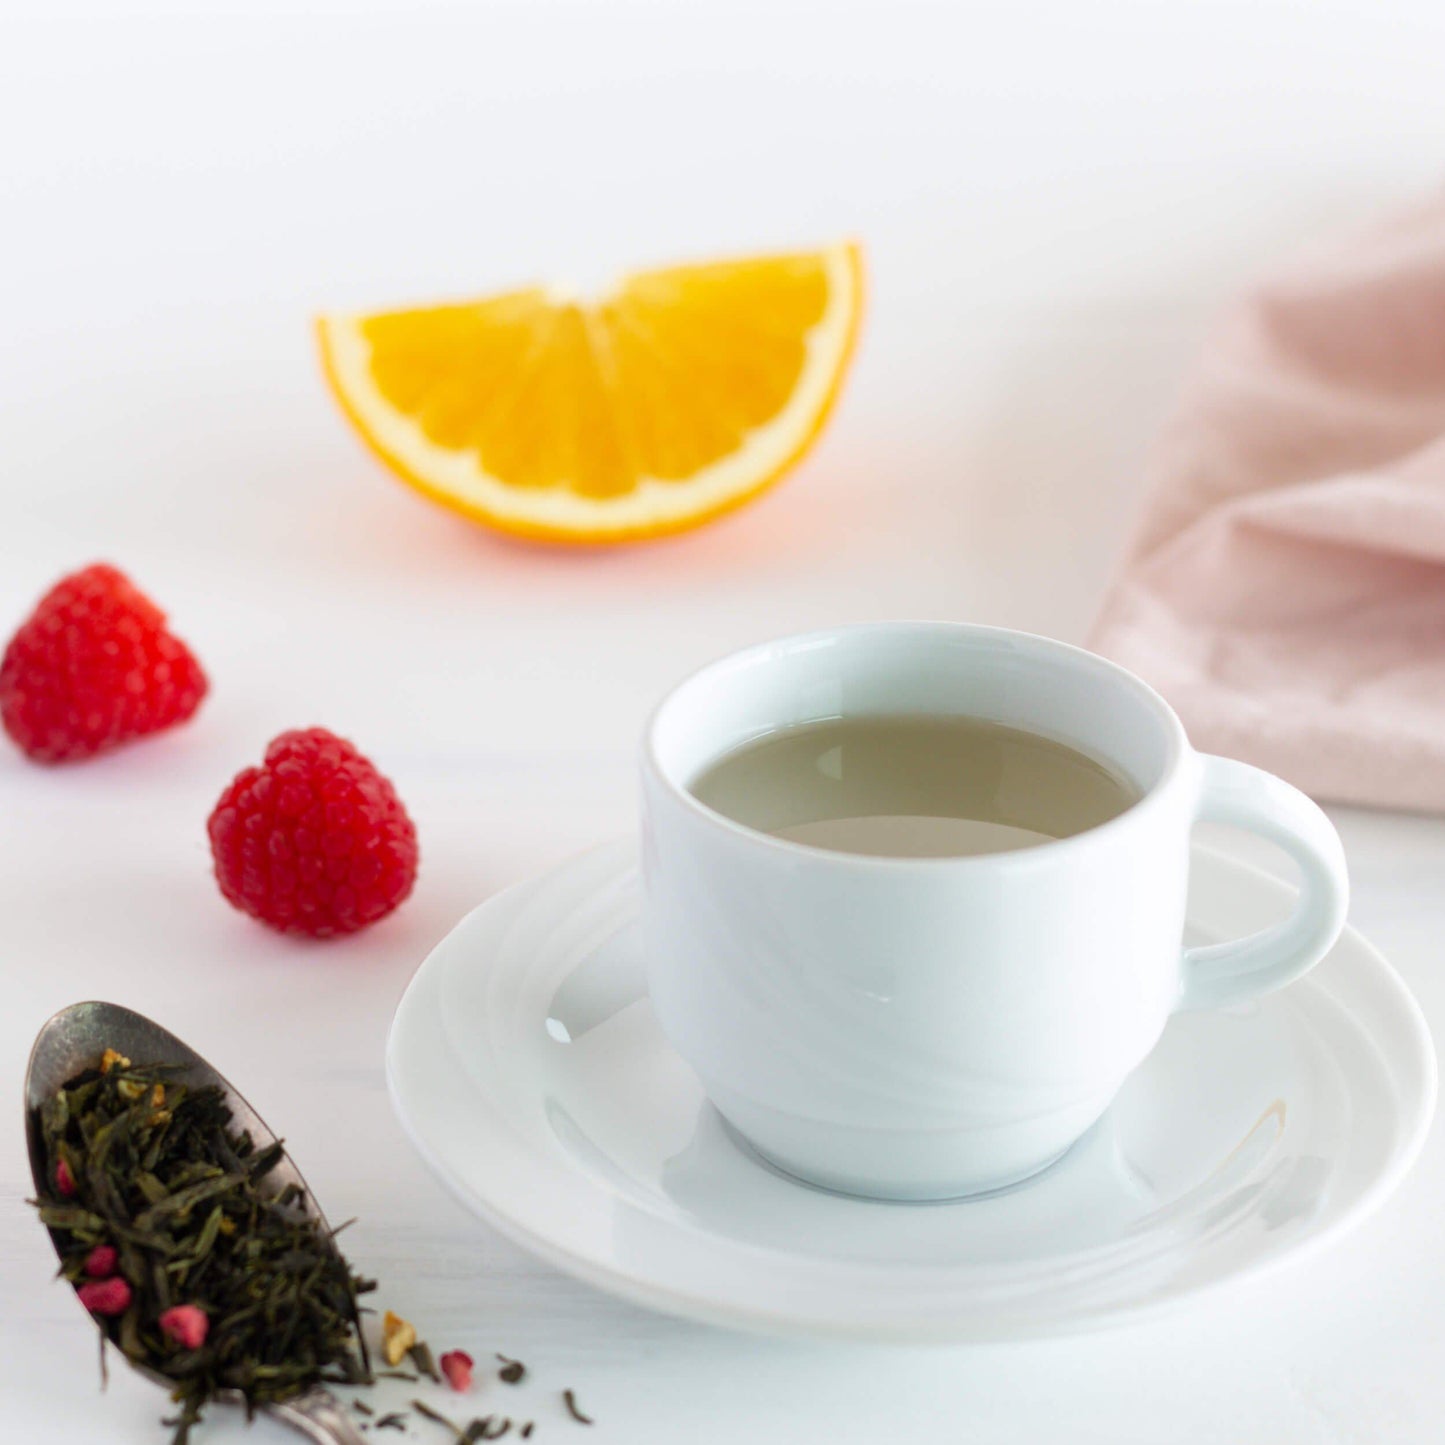 Raspberry Orange Rhapsody Green Tea shown as brewed tea in a white teacup and saucer with a wedge of orange and raspberries nearby